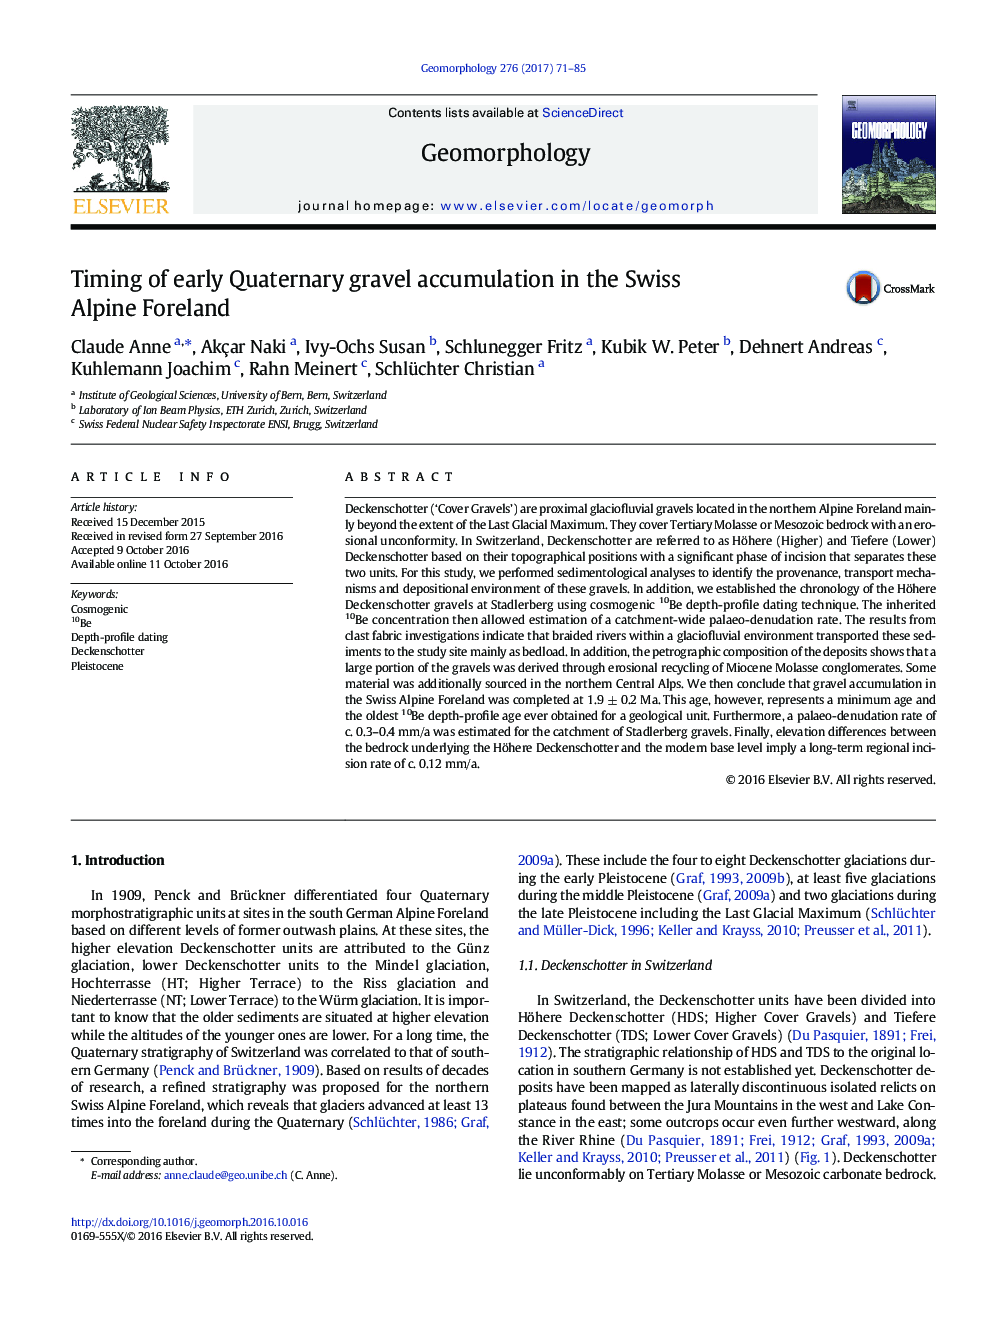 Timing of early Quaternary gravel accumulation in the Swiss Alpine Foreland